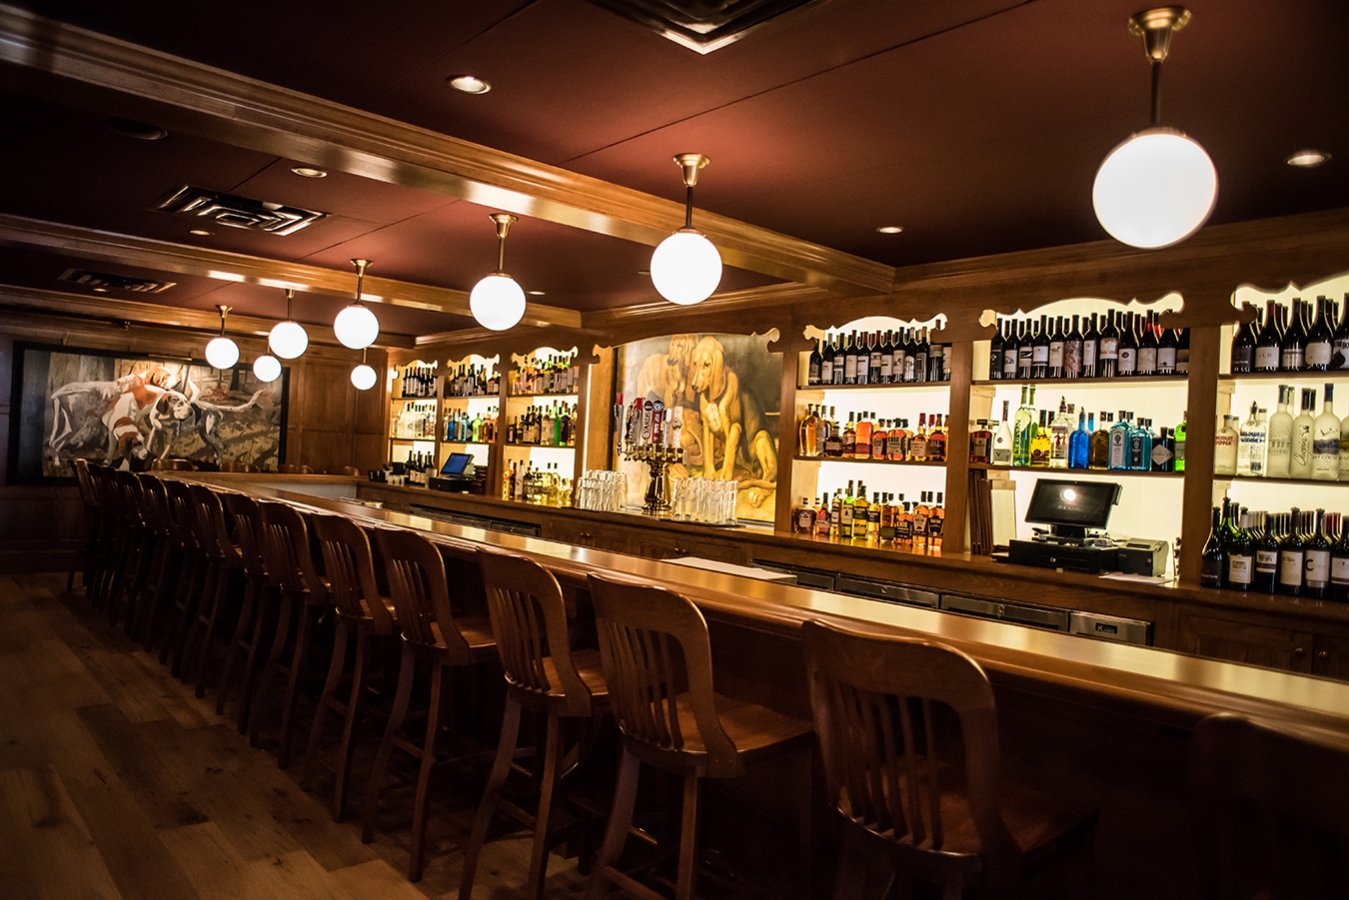 The bar is an energetic spot for happy hour